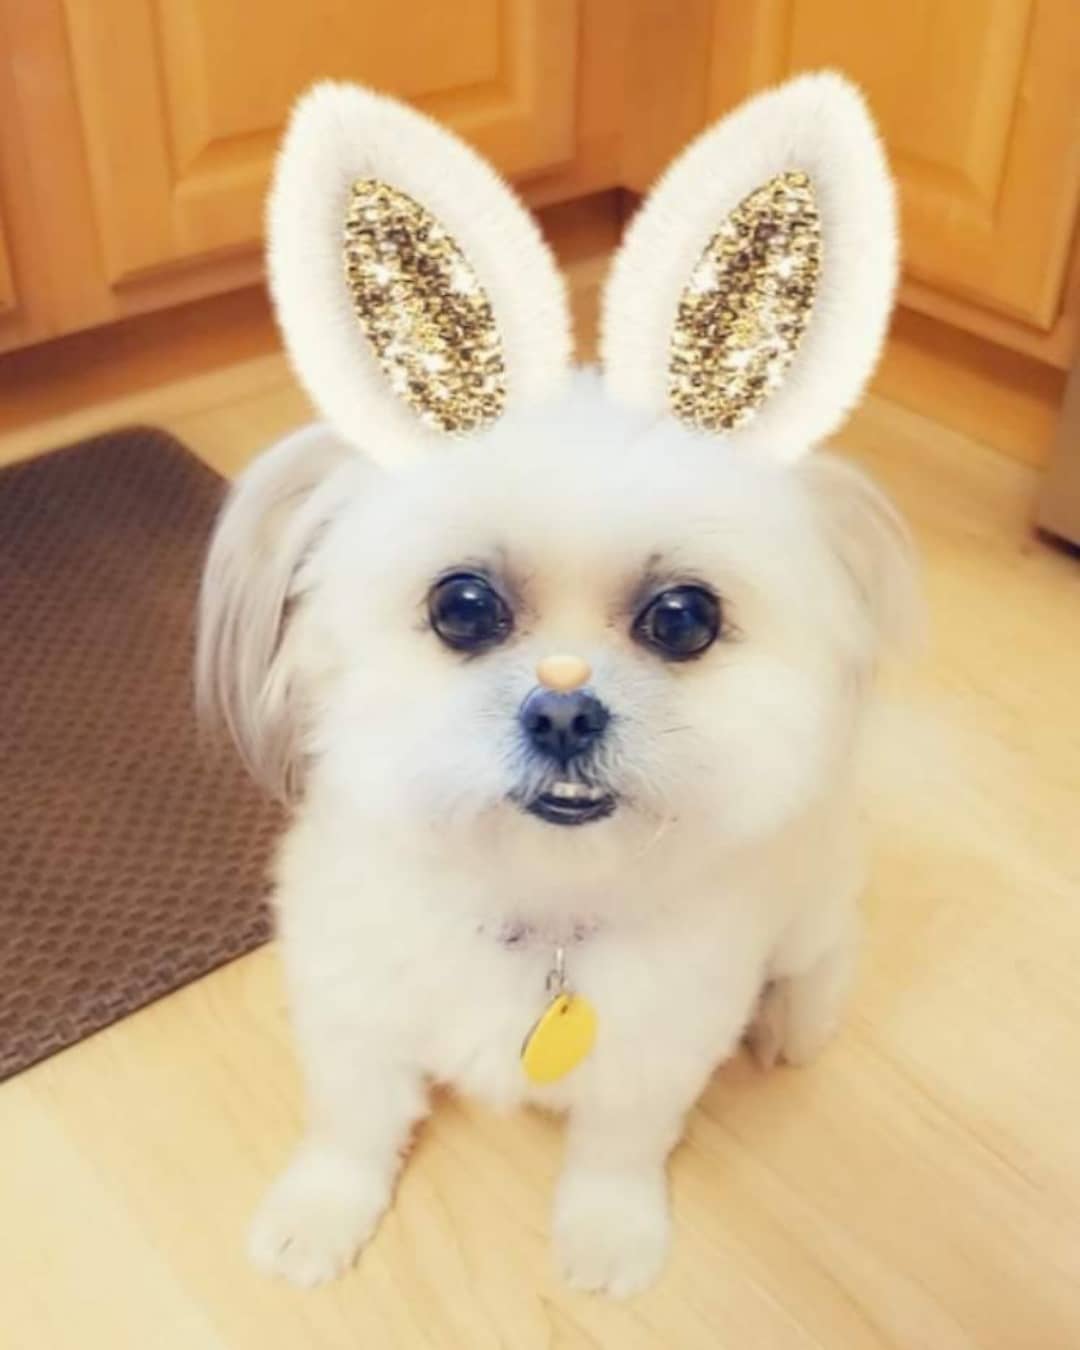 A Shih Tzu wearing bunny ears while sitting on the floor